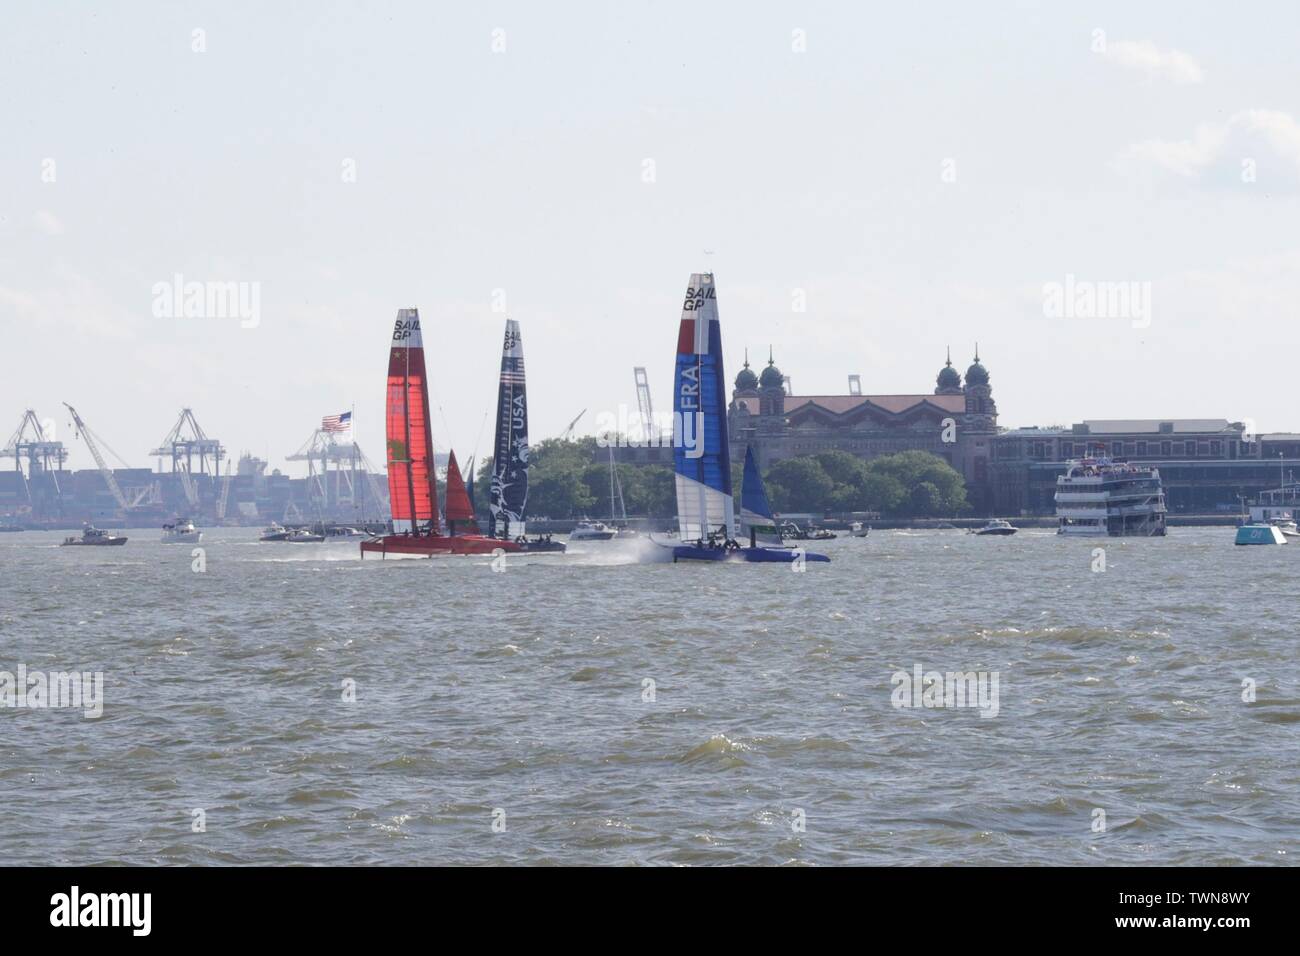 Hudson River, New York, USA, June 21, 2019 - SailGP teams sail their race during racing day 1 of the SailGP event today in New York.Photo: Luiz Rampelotto/EuropaNewswire PHOTO CREDIT MANDATORY. | usage worldwide Stock Photo